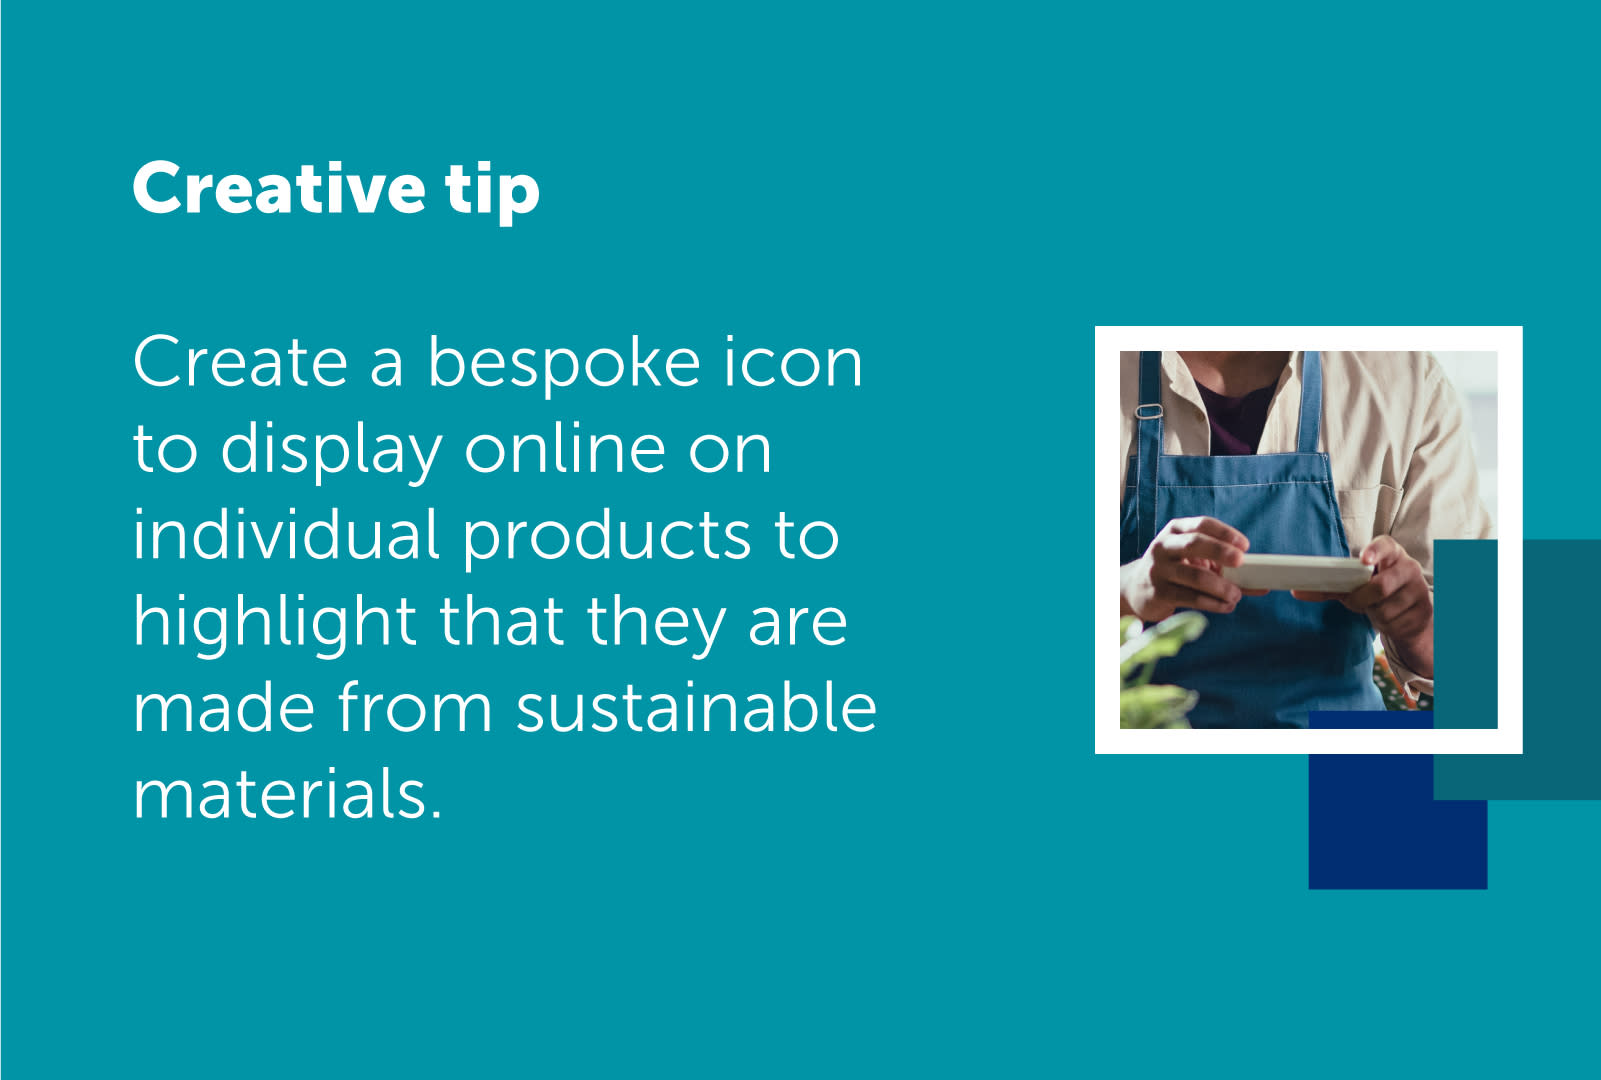 Text on image reads: Create a bespoke icon to display online on individual products to highlight that they are made from sustainable materials.  